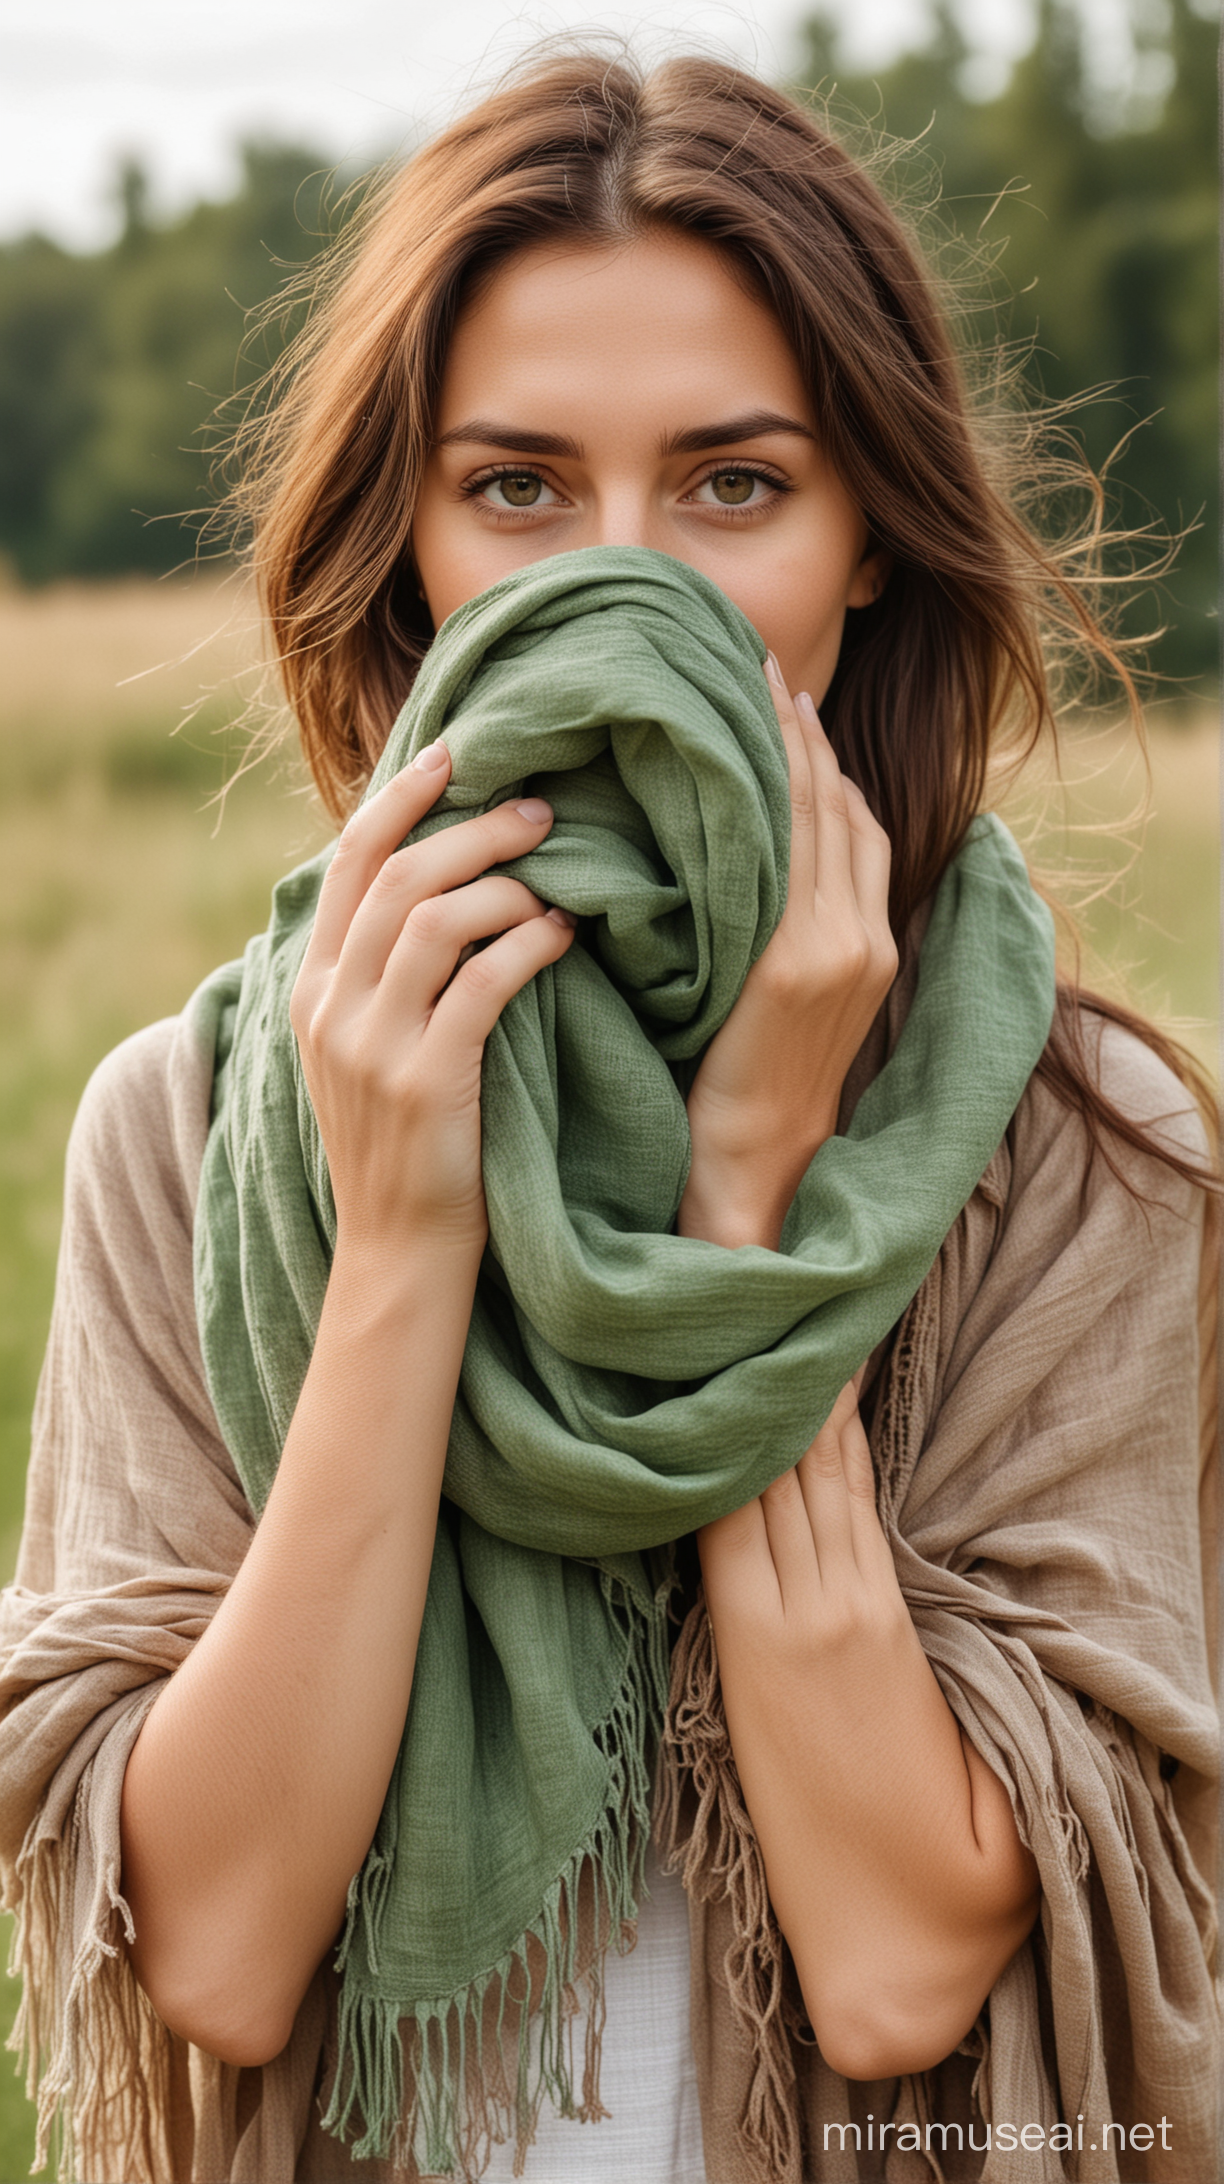 Boho Style Woman with Scarf Beautiful Brown Hair and Mysterious Eyes